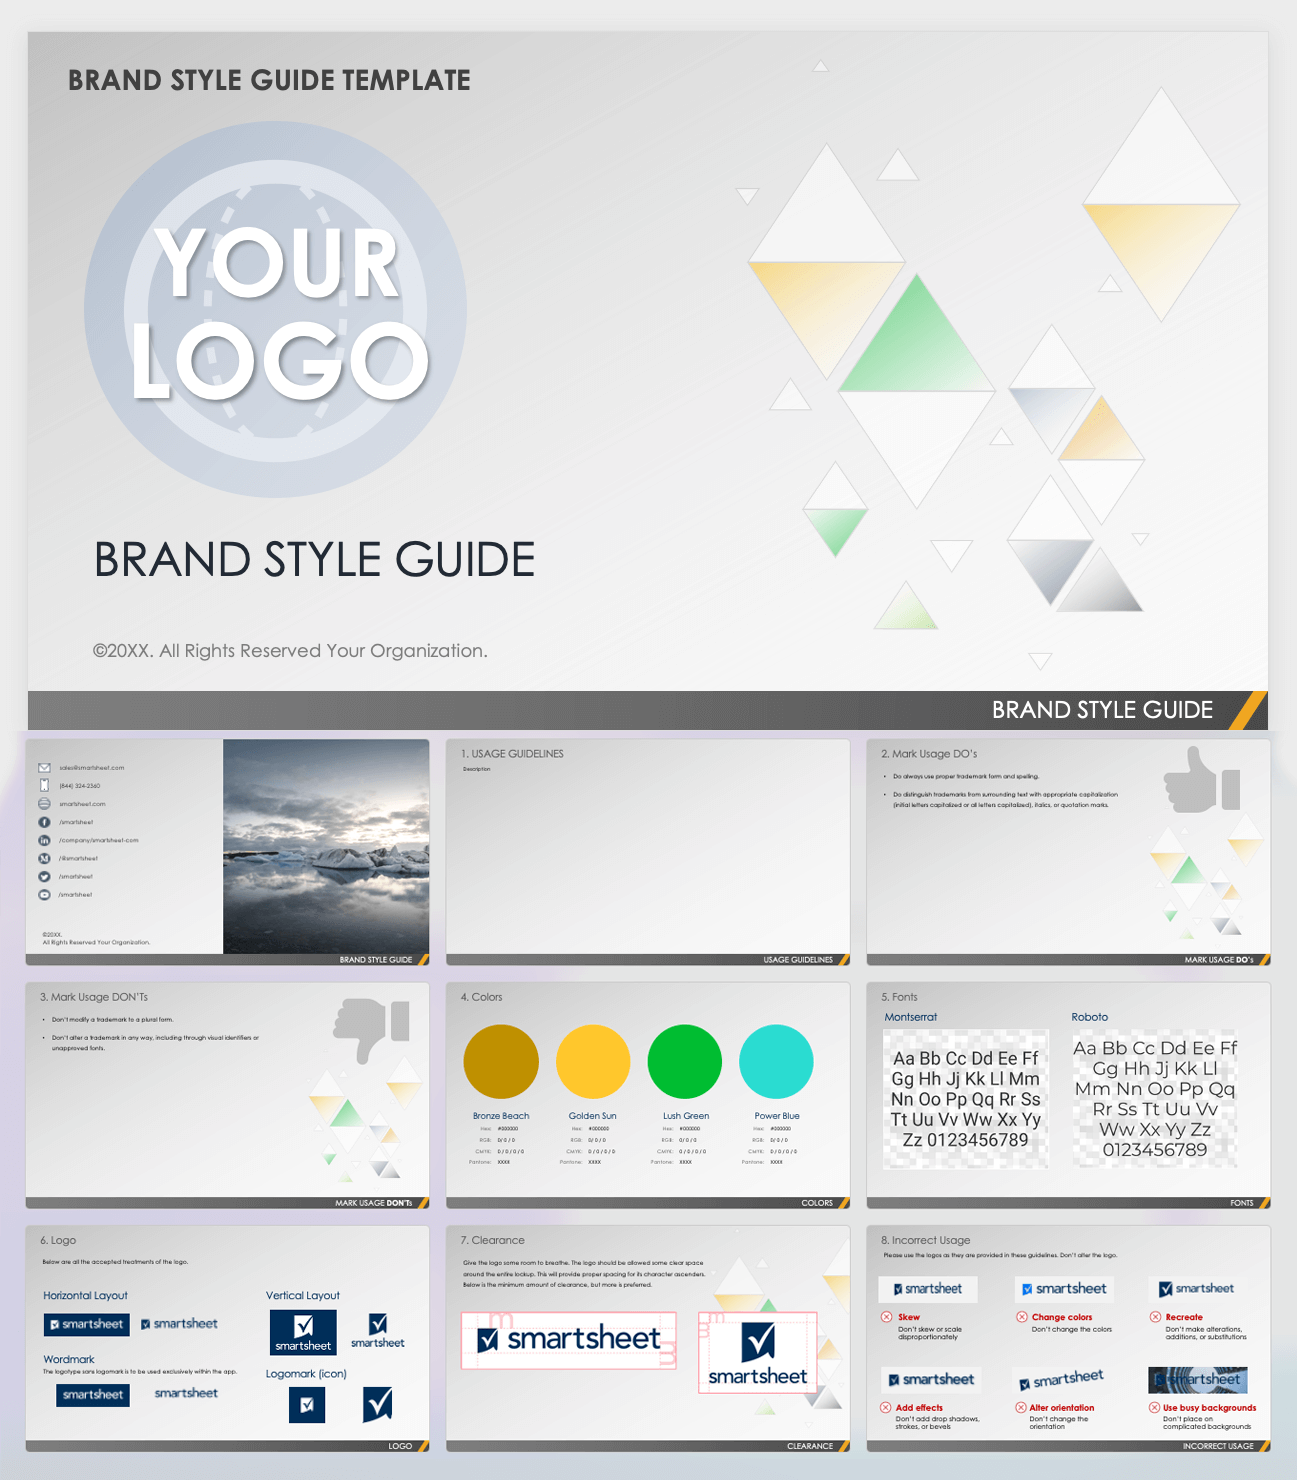 Free Brand Guidelines Template (+ Best Tips), Easily Customizable